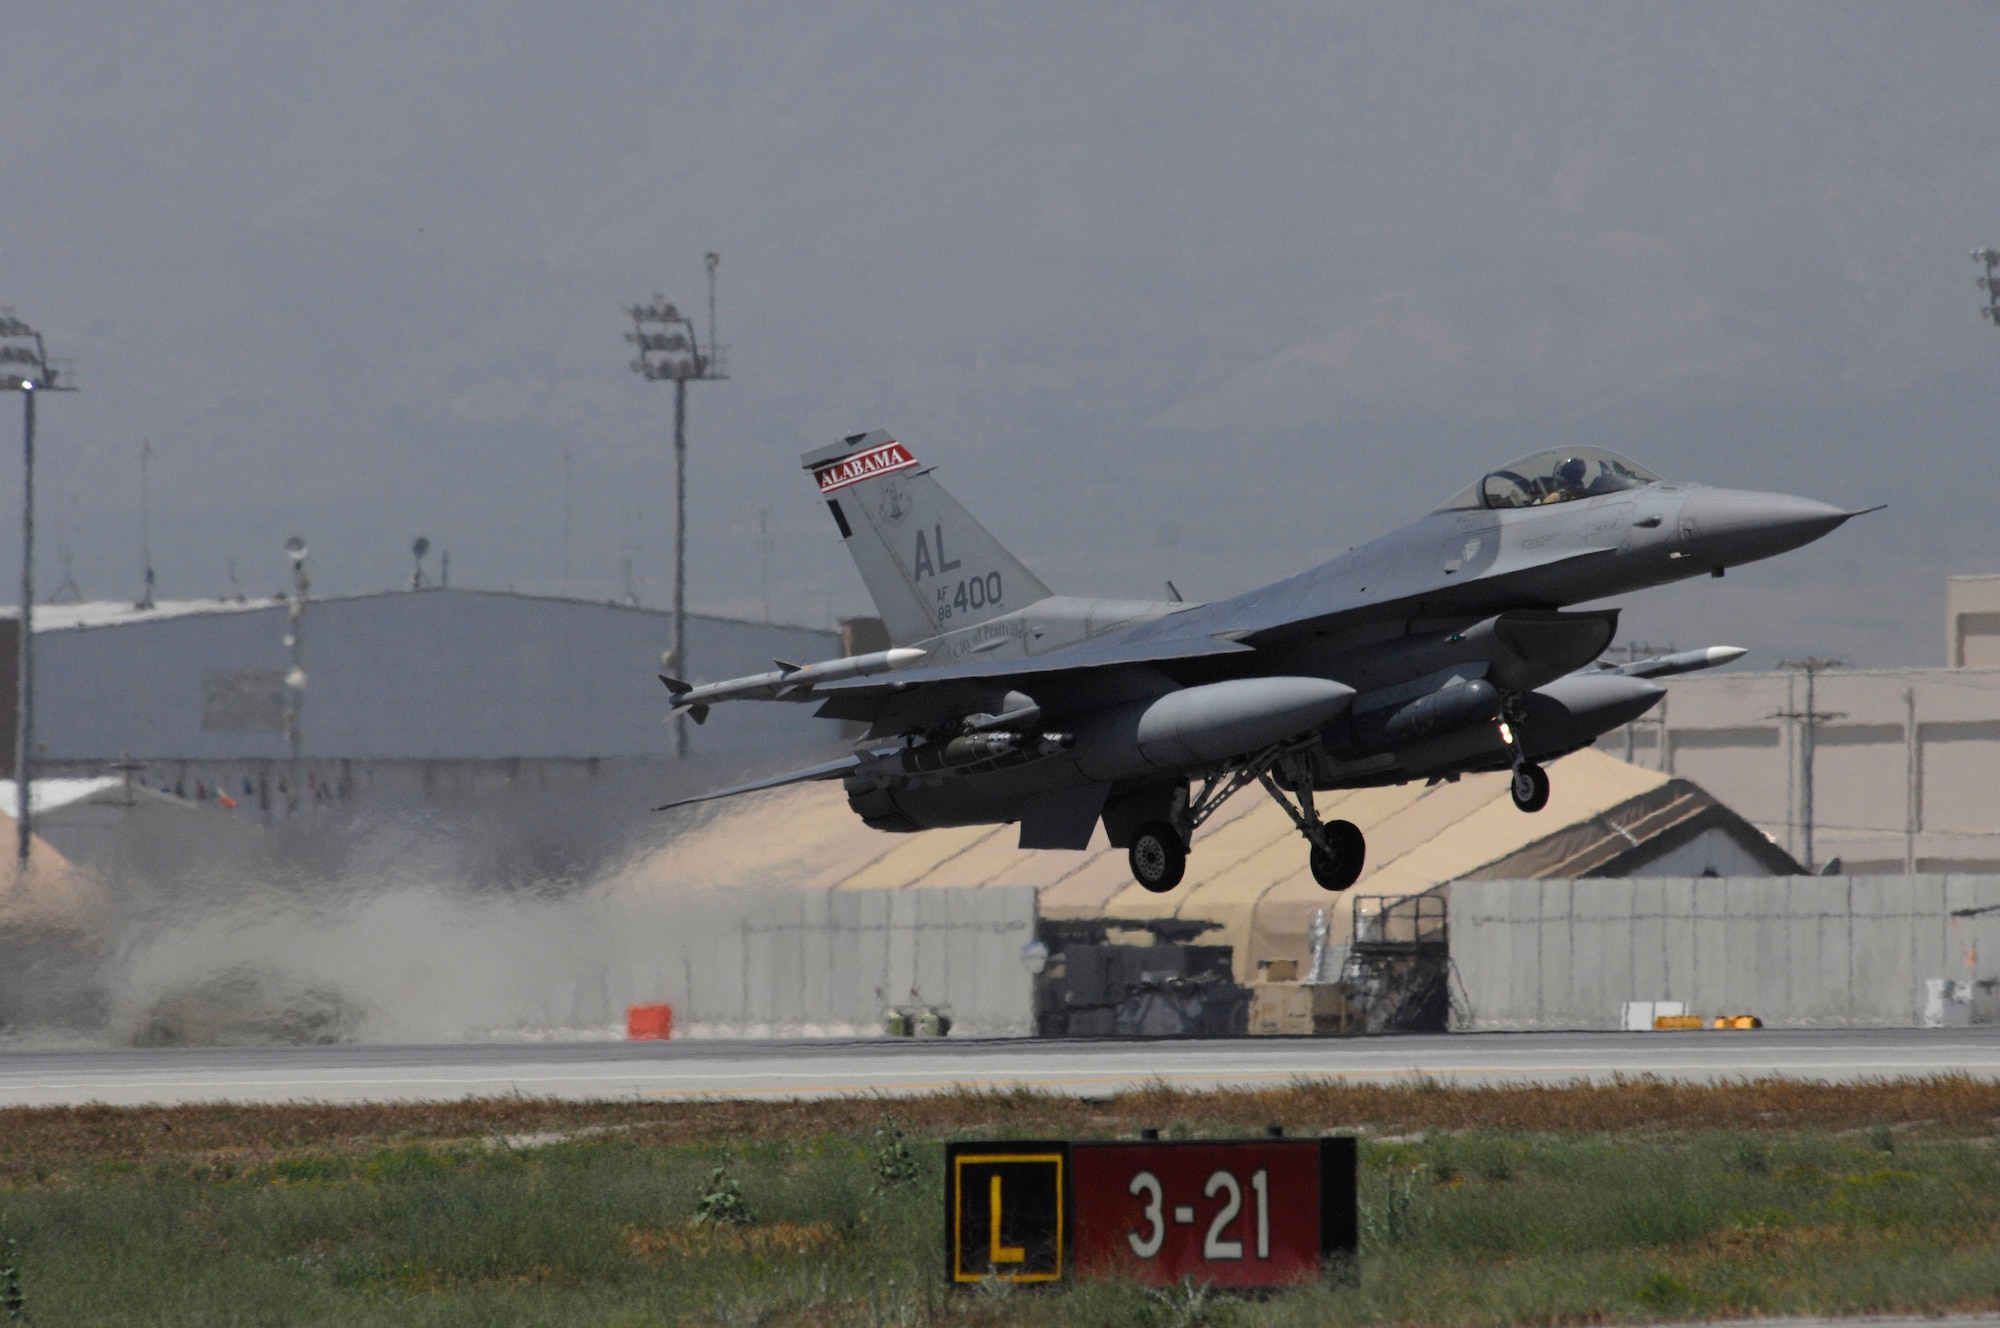 A U.S. Air Force F-16 Fighting Falcon takes off at Bagram Airfield, Afghanistan May 9, 2014.  Deployed service members help operate 46 different types of aircraft in-and-out of the buisiest single runway airfield in the Department of Defense. (U.S. Air Force photo by Master Sgt. Cohen A. Young/Released)